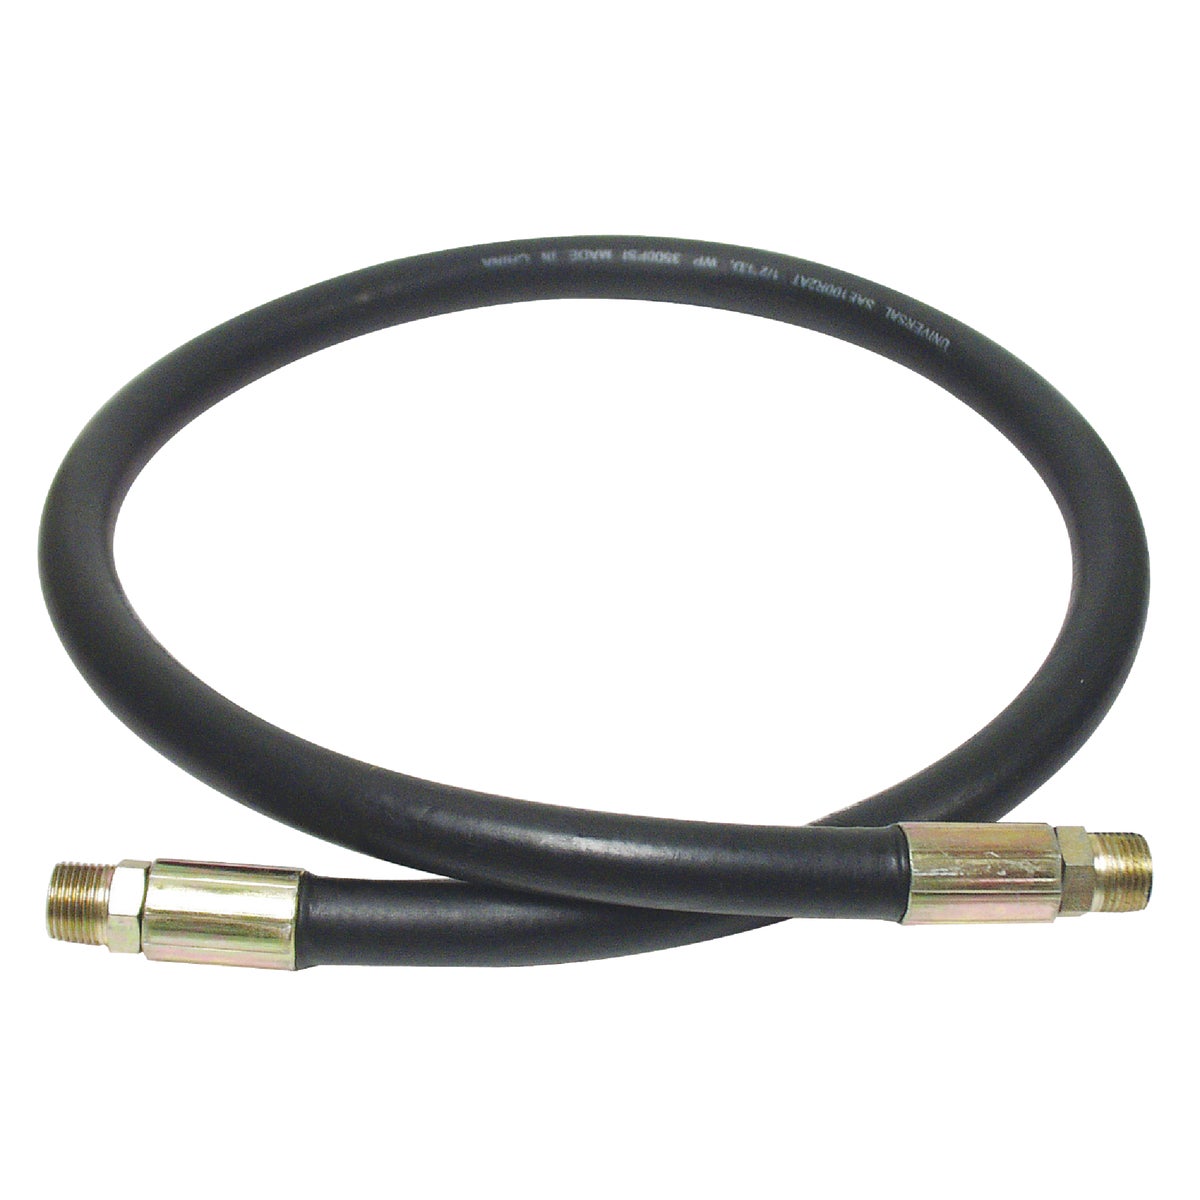 Item 734196, Assemblies, 2-wire. Hose and couplings meet 100R2AT specification. 3/8 In.